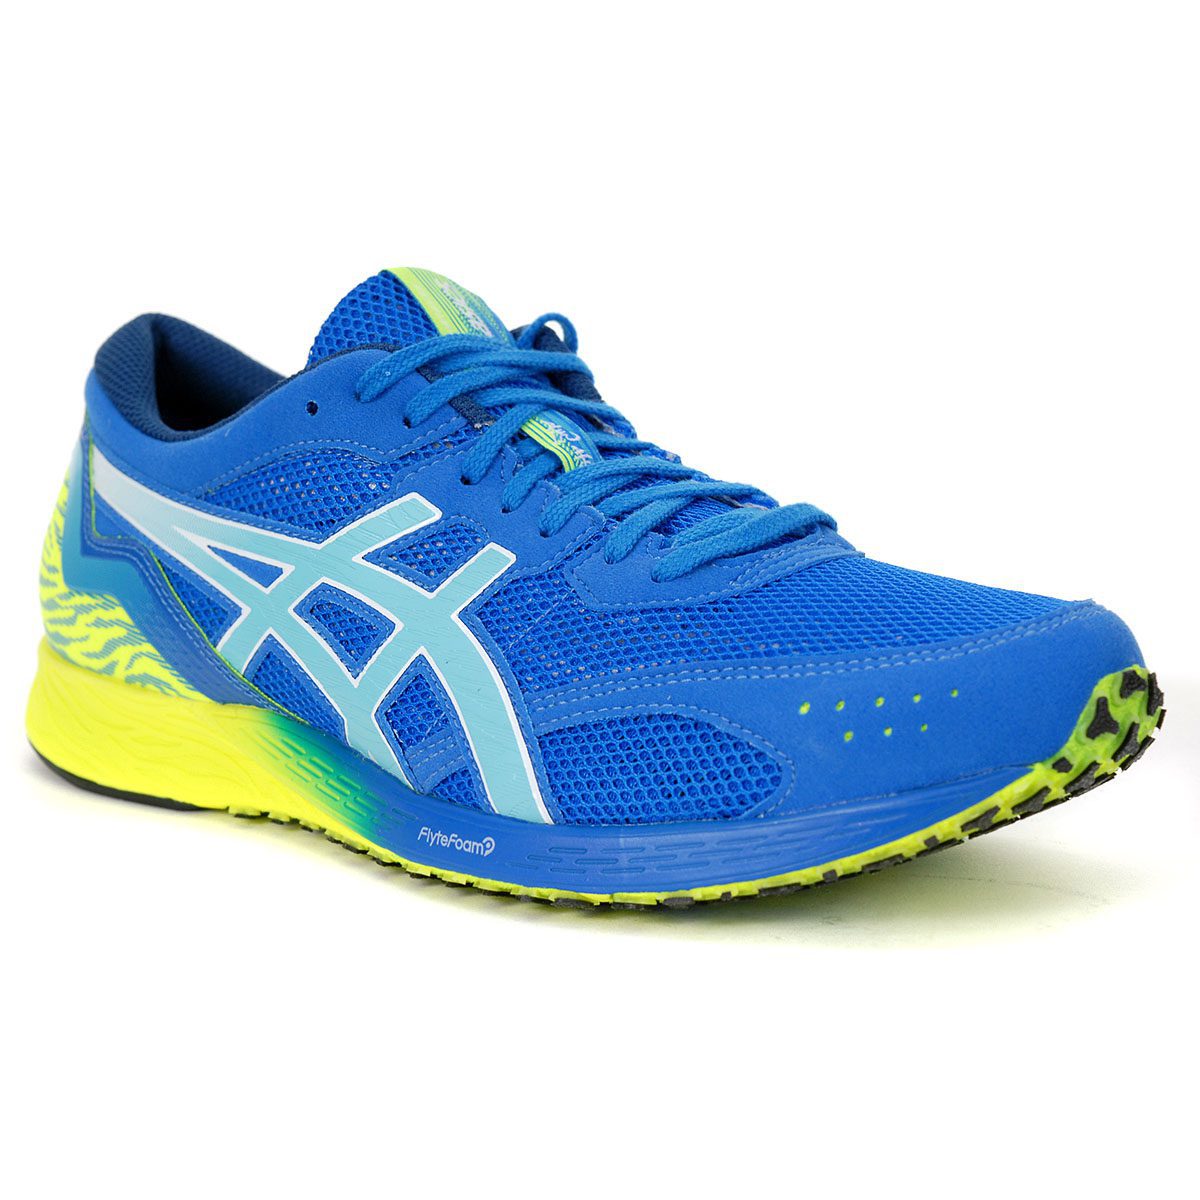 ASICS Men's Tartheredge Running Shoes Directory Blue/Ice Mint 1011A544 ...